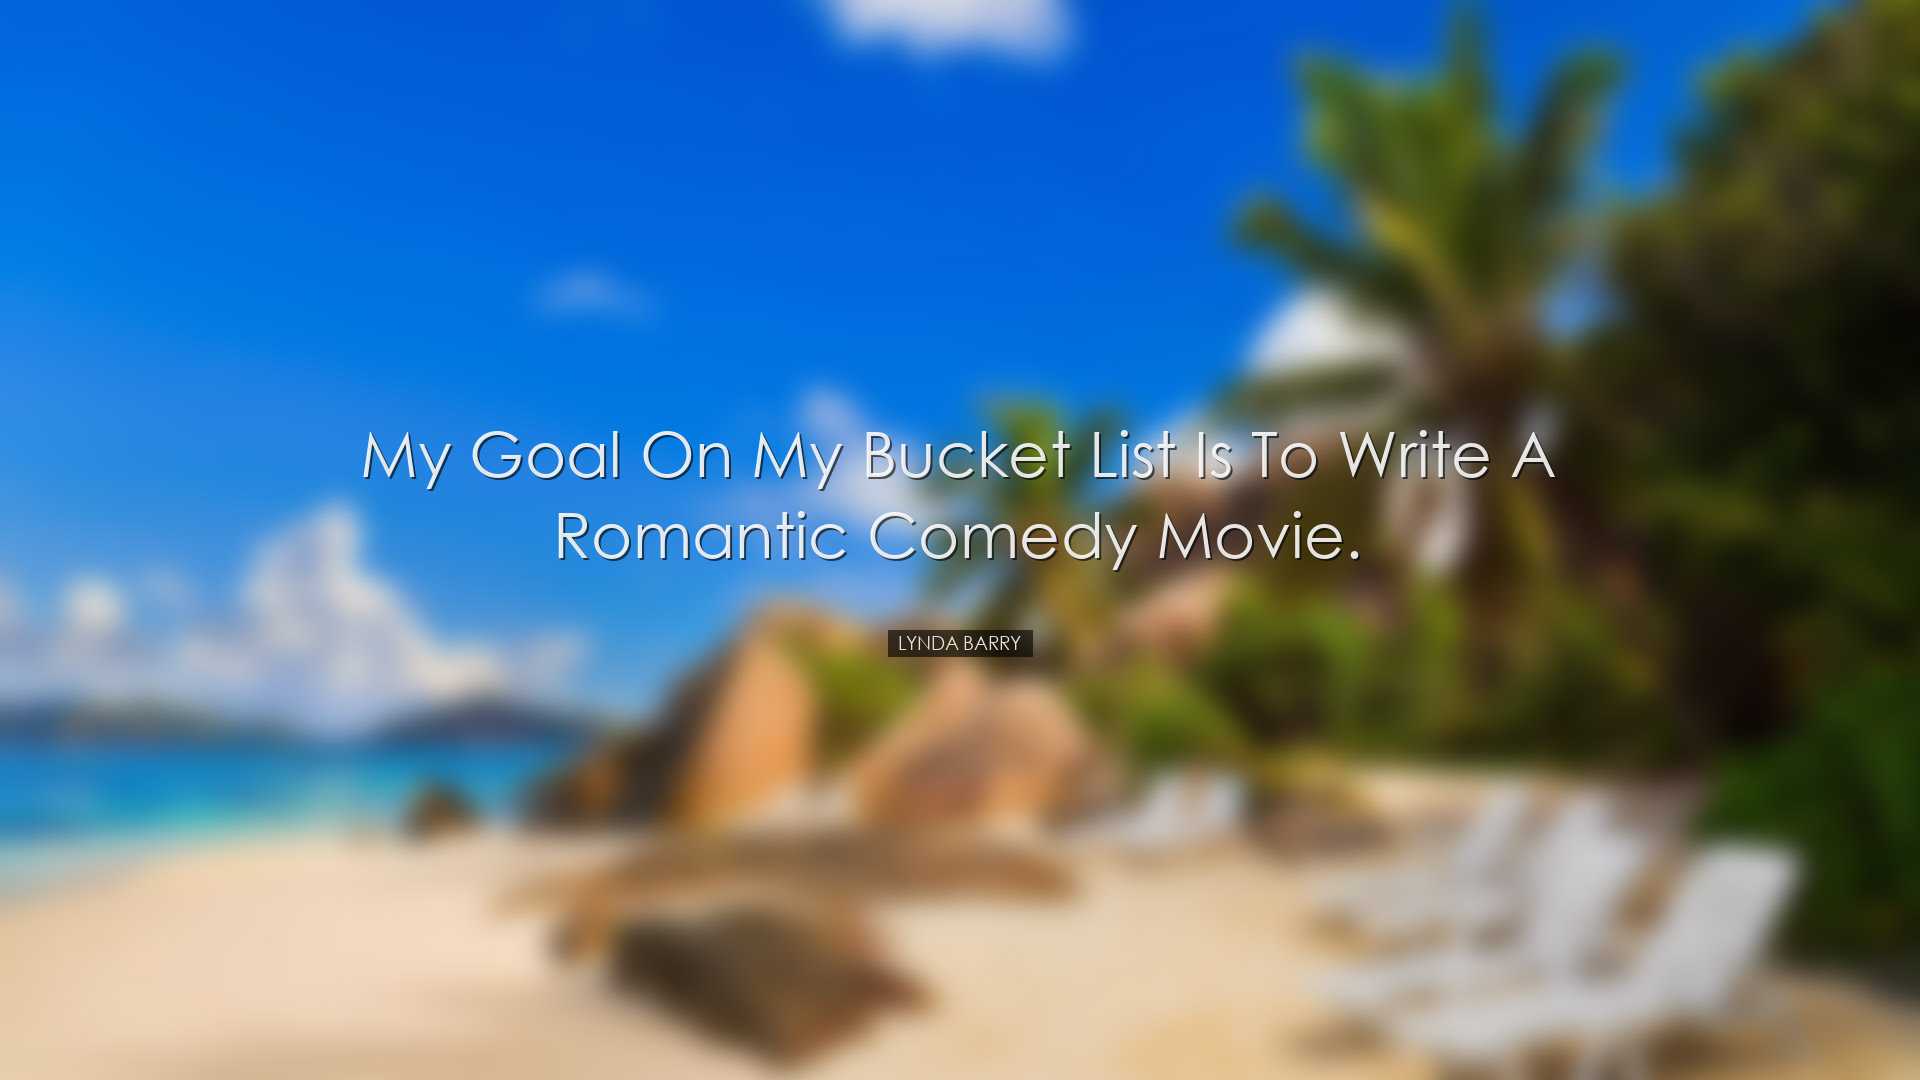 My goal on my bucket list is to write a romantic comedy movie. - L